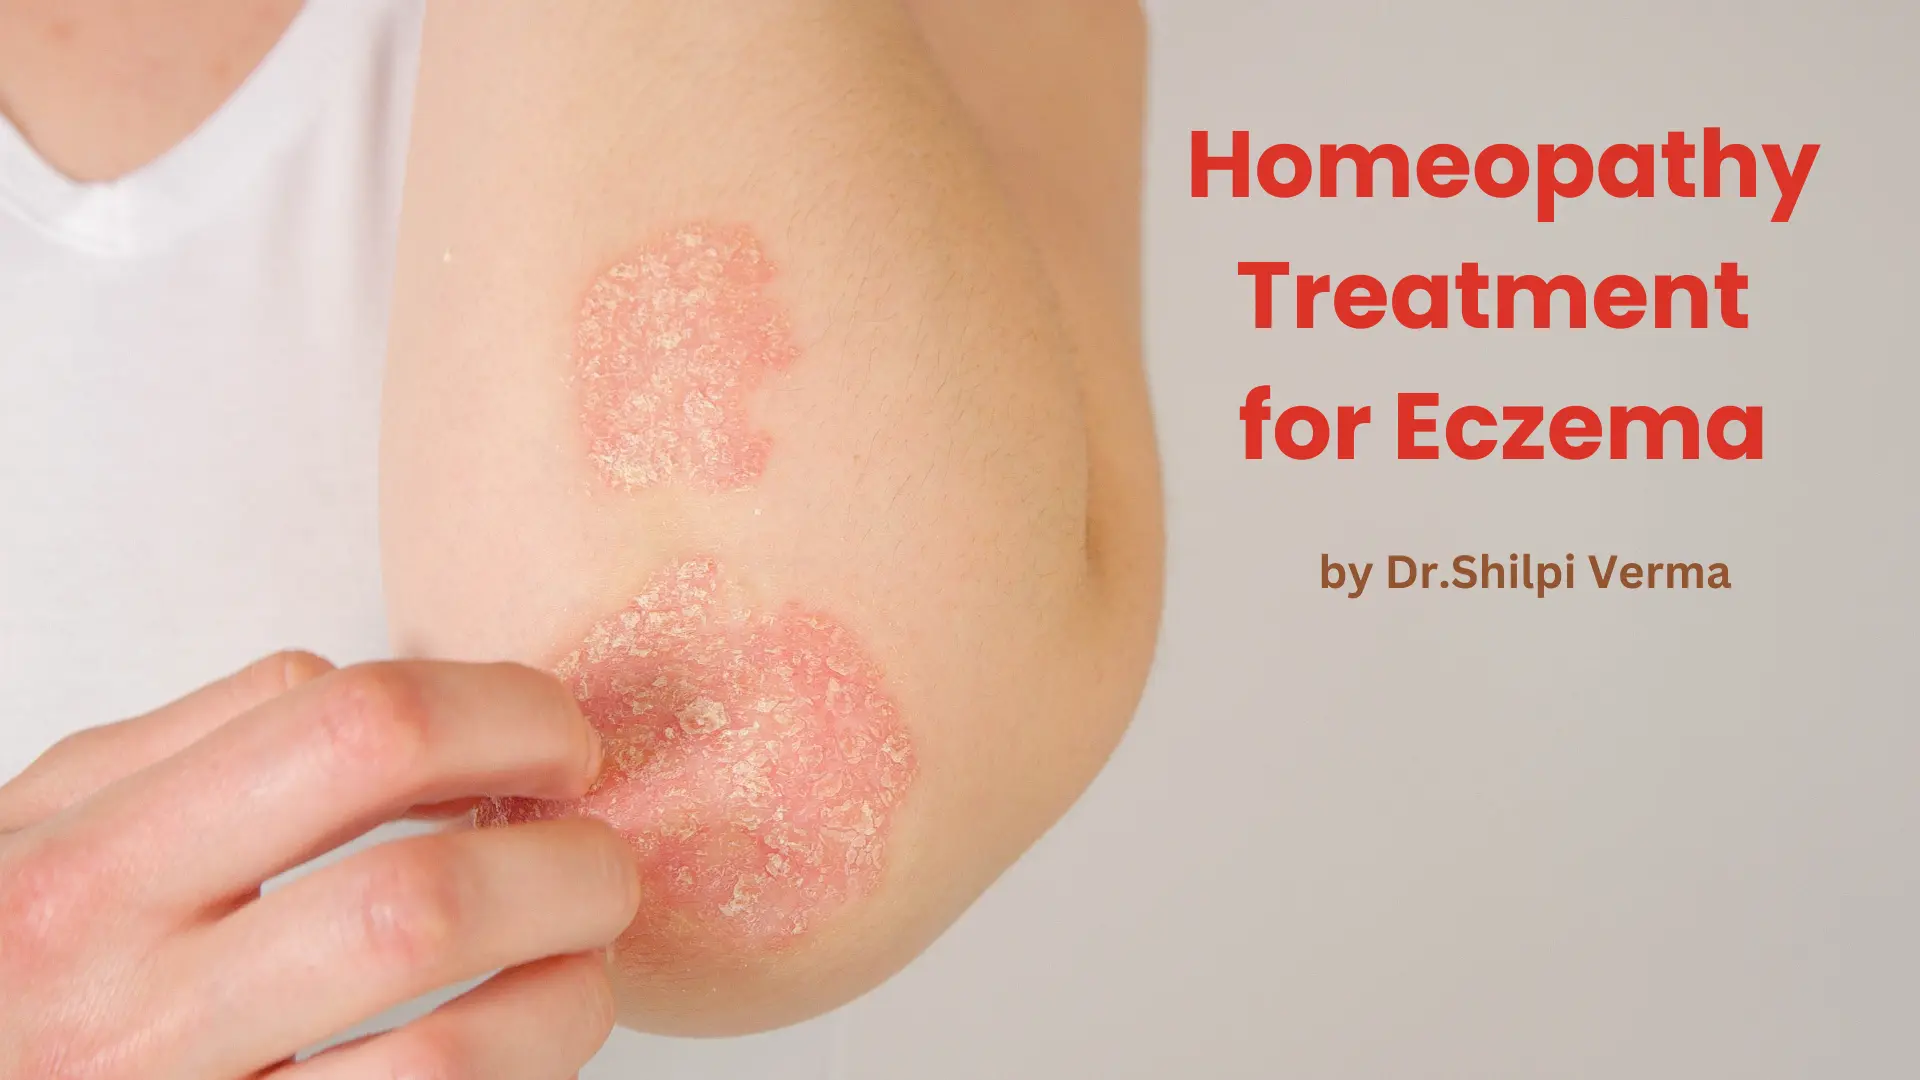 Homeopathy Treatment for Eczema